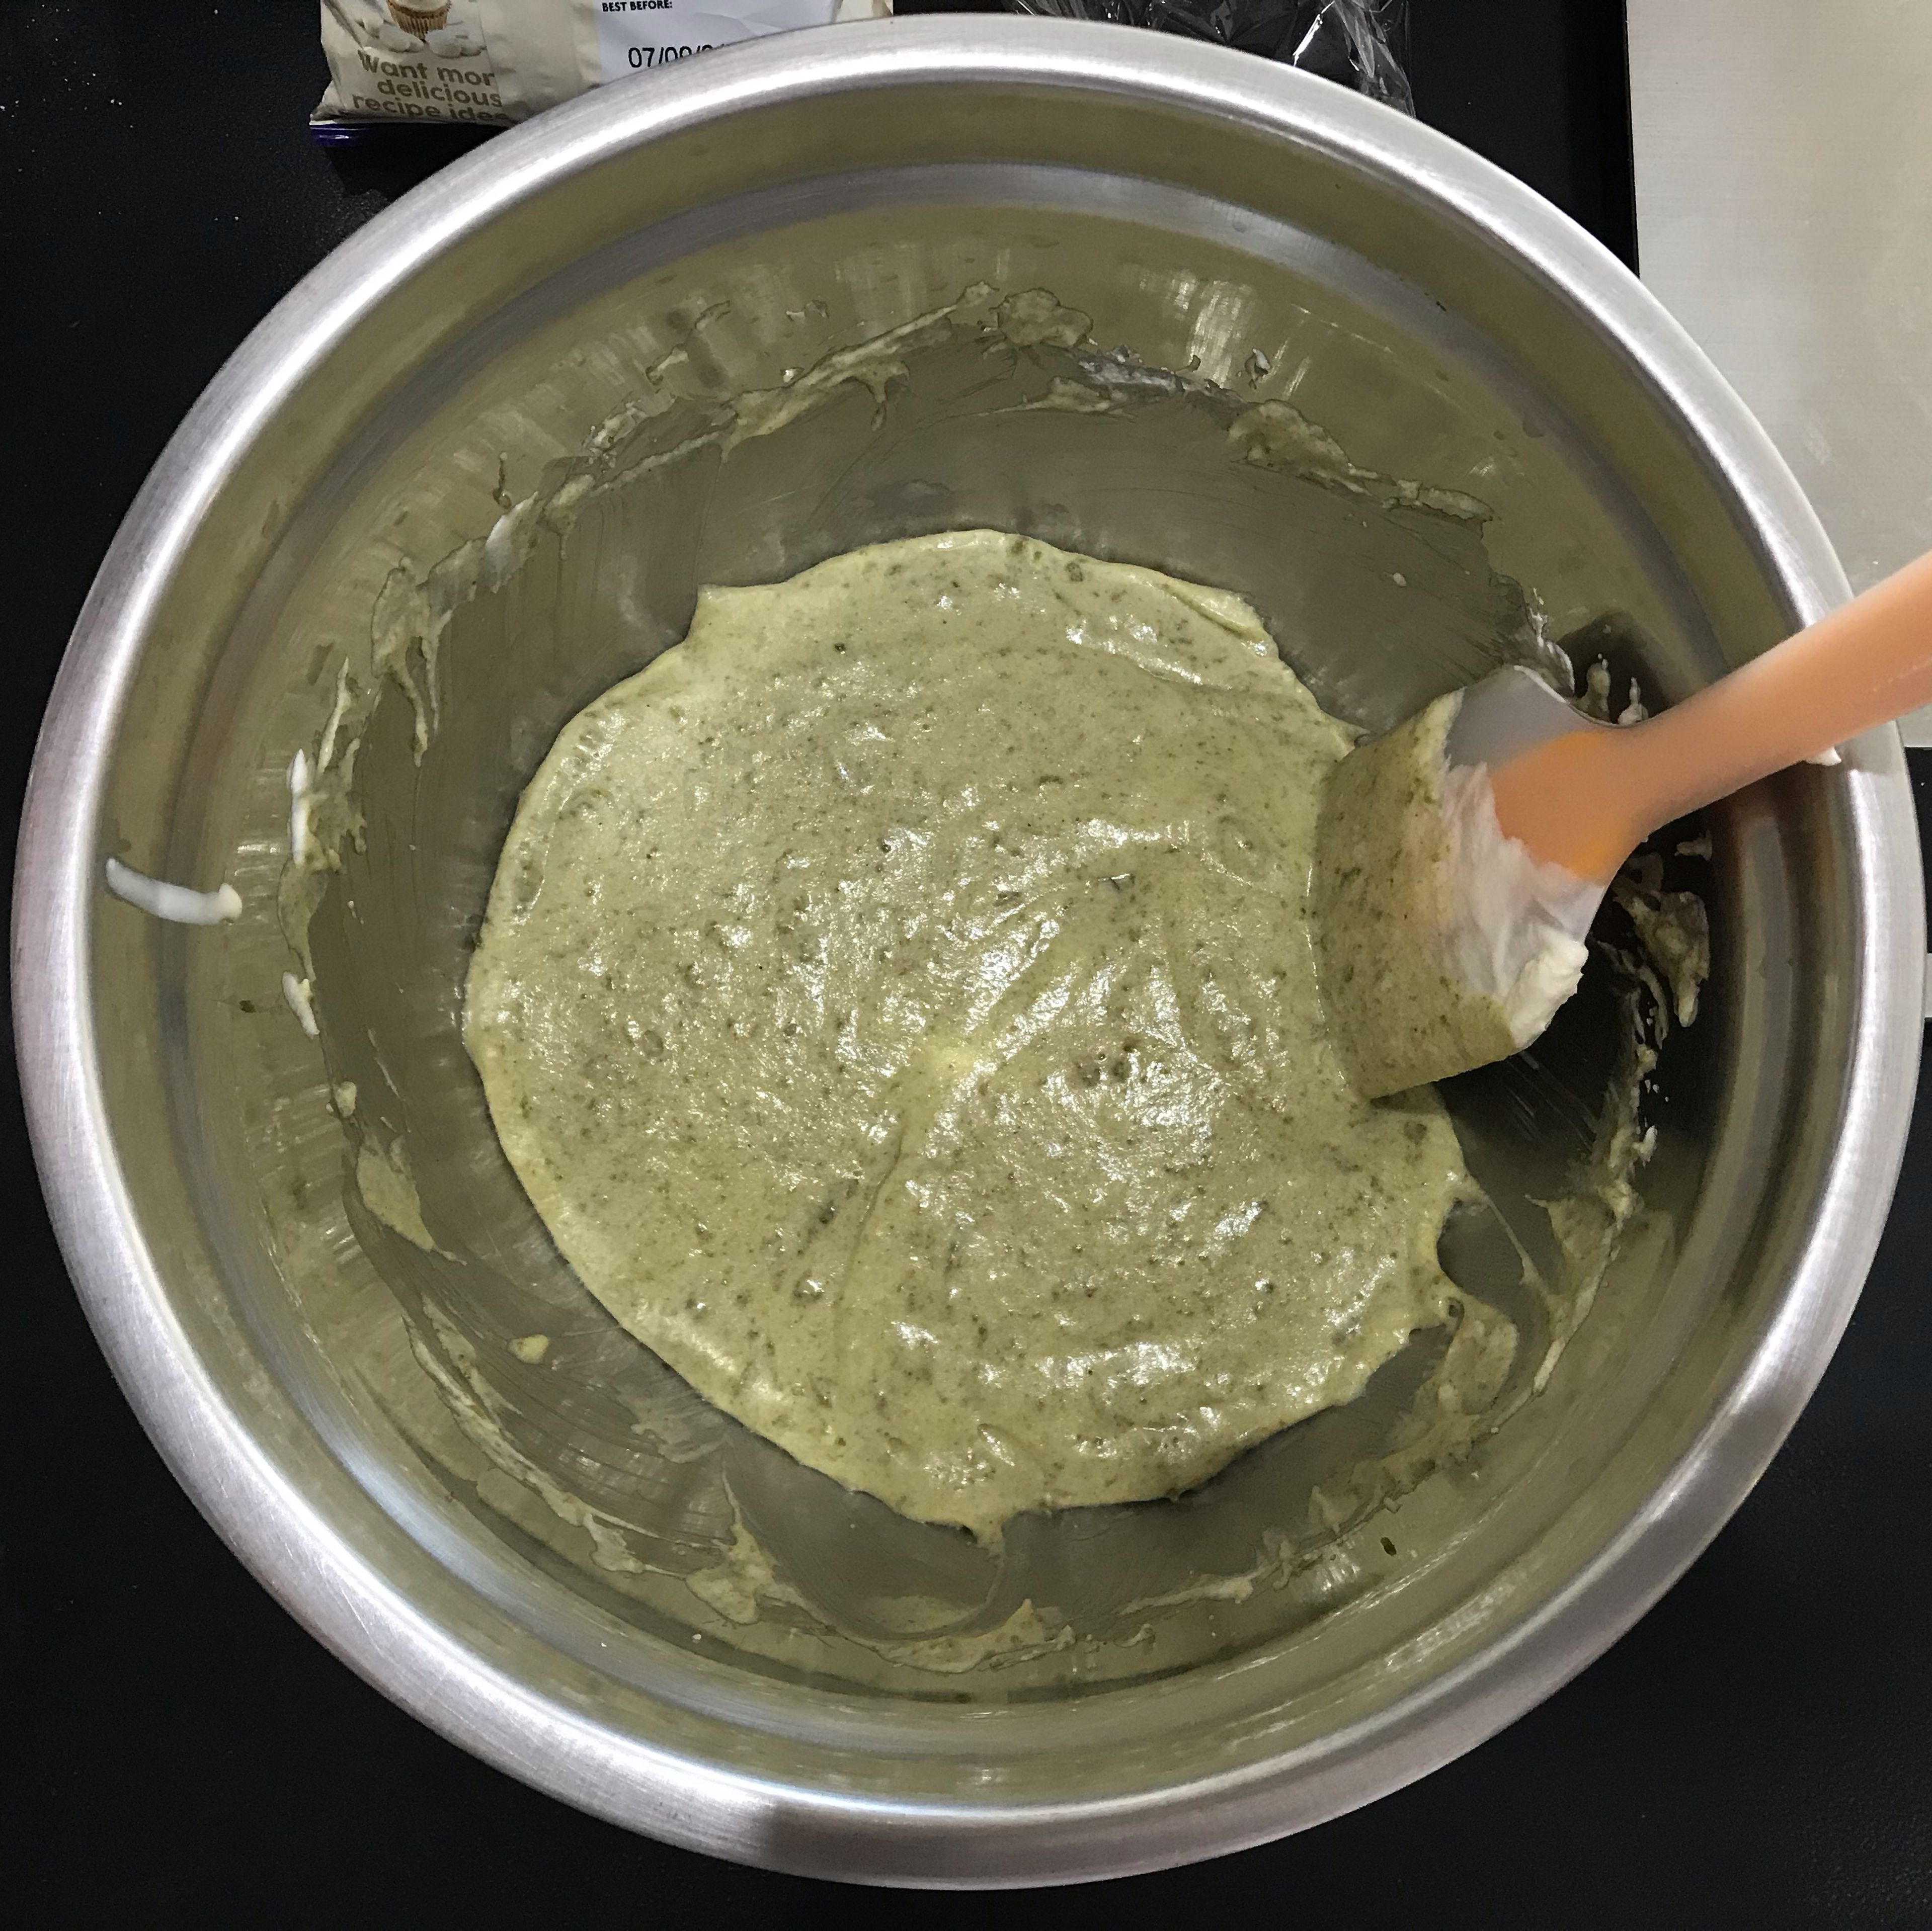 Once cooled, whisk remaining 150g cream to soft peaks and fold through pistachio mixture.